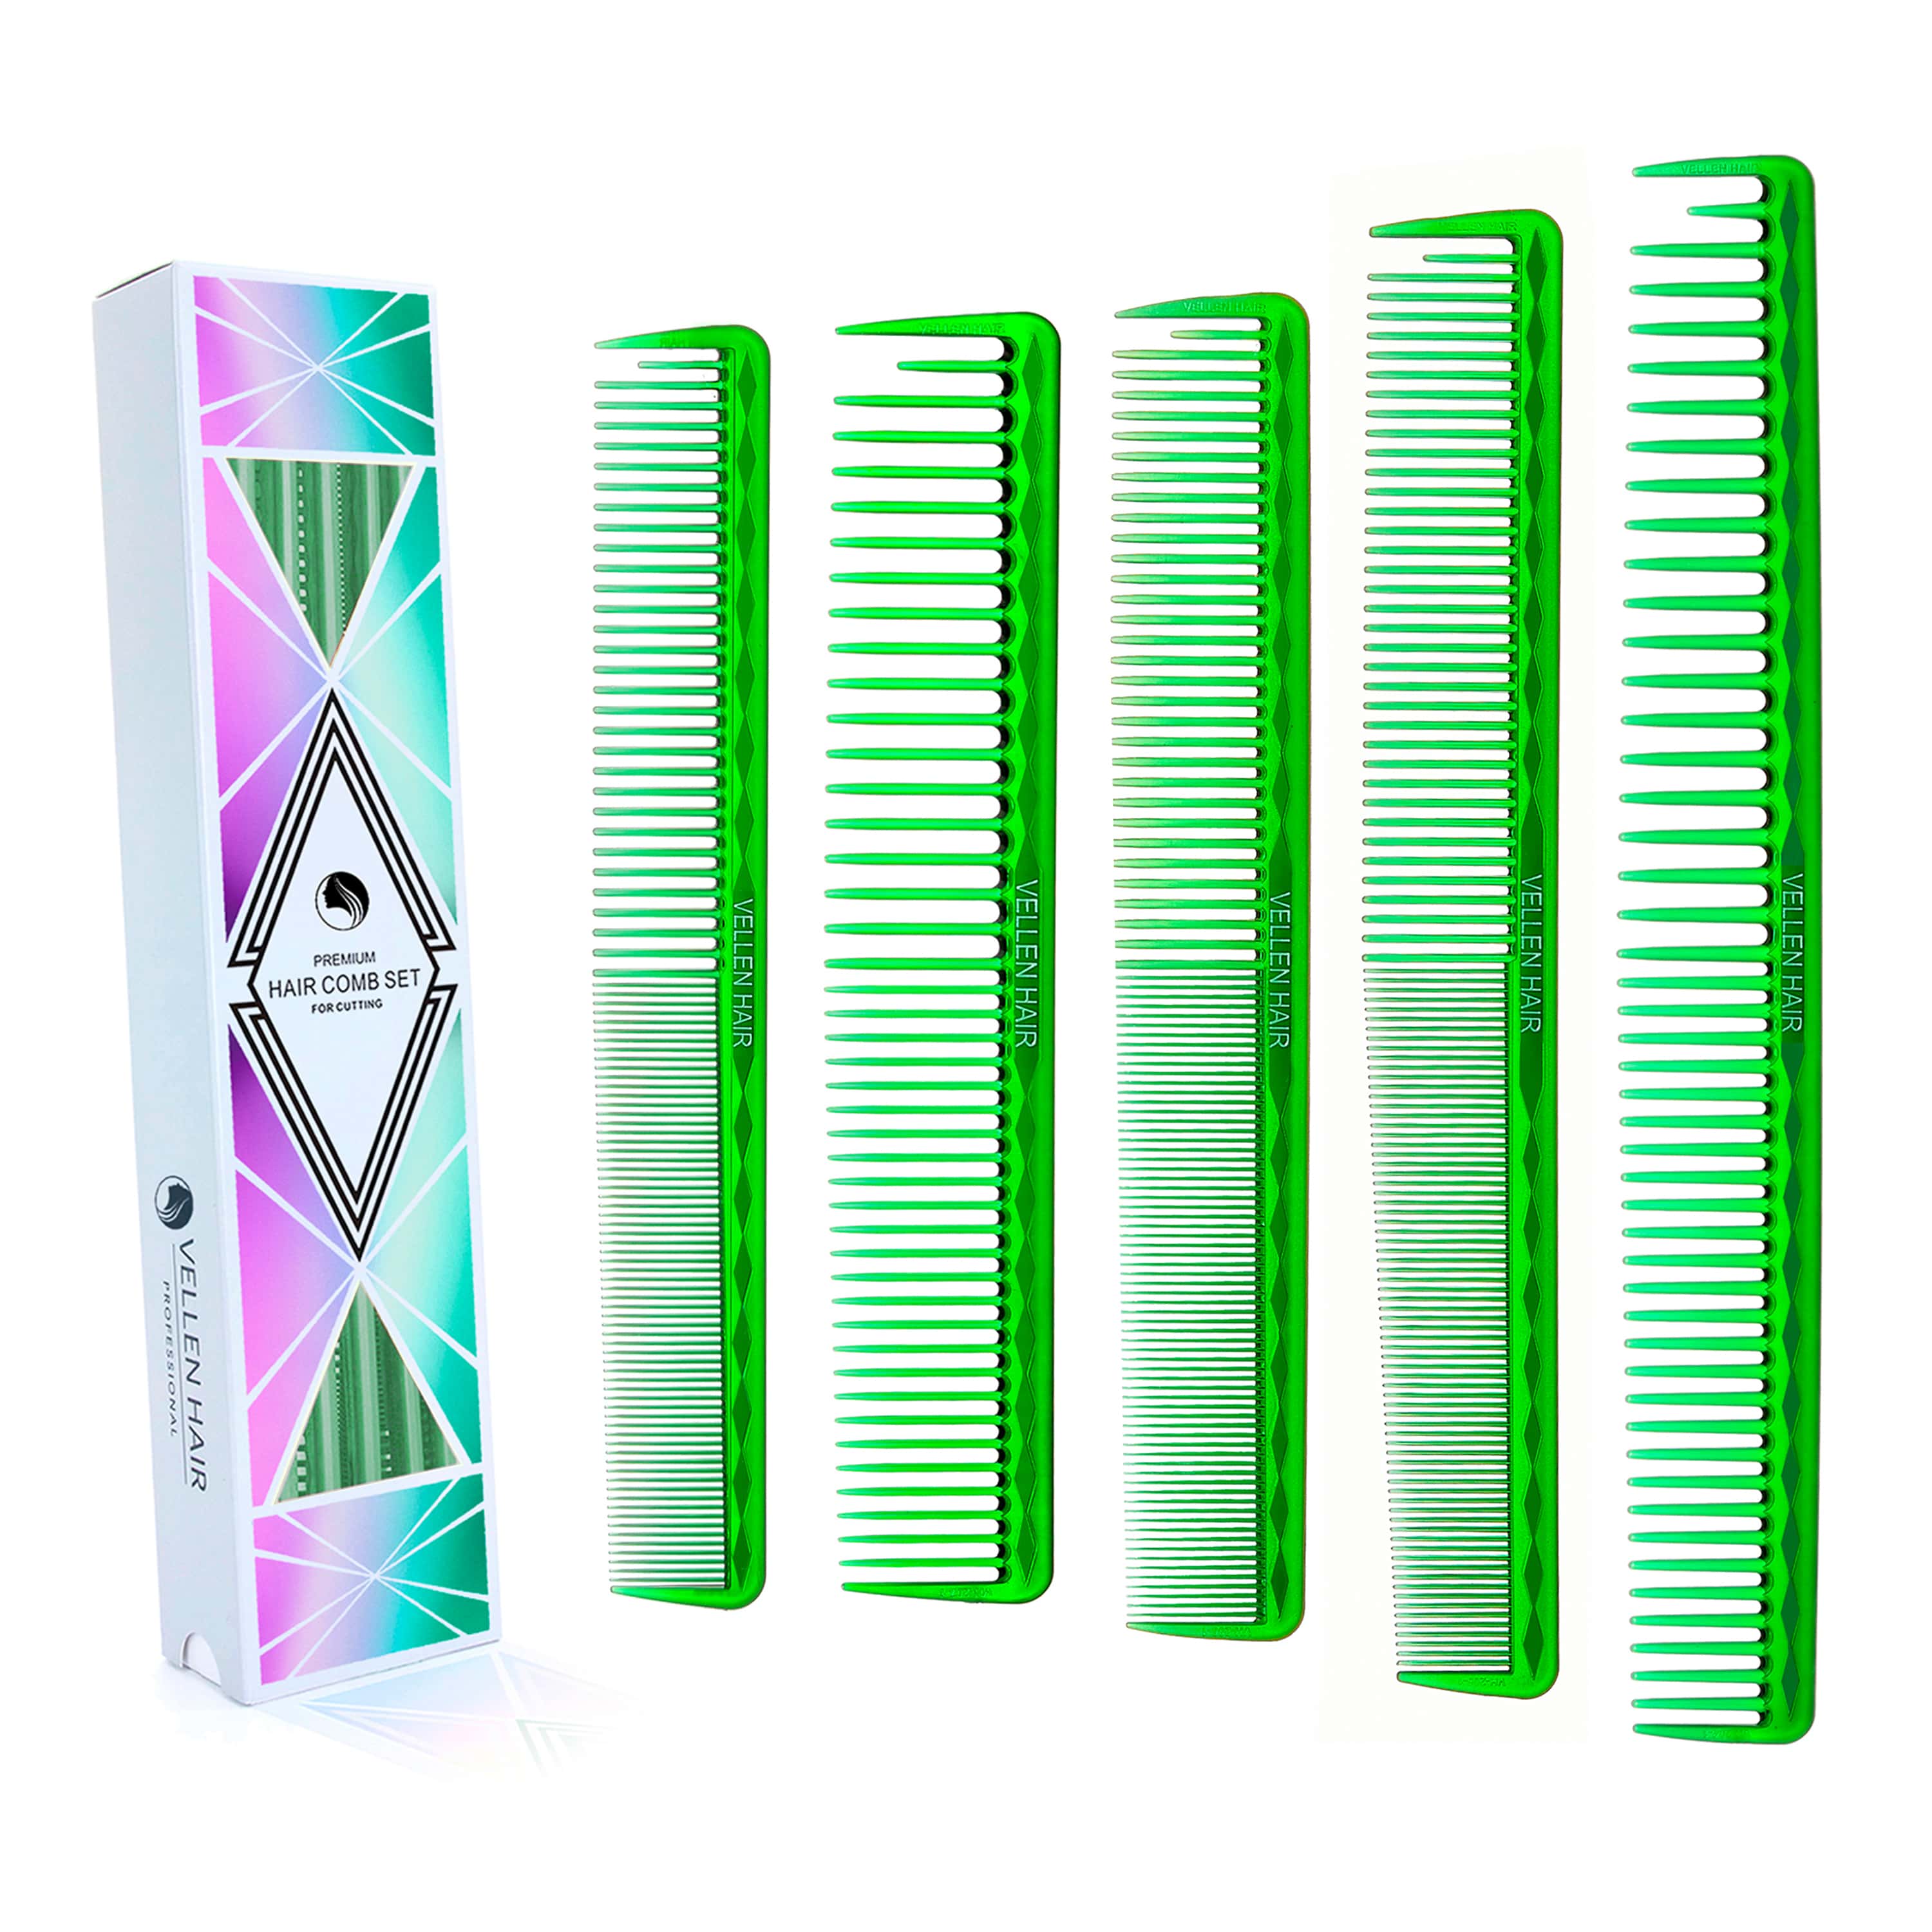 Vellen Hair® Ultimate Cutting Combs 5 Different Sizes - Green Transparent